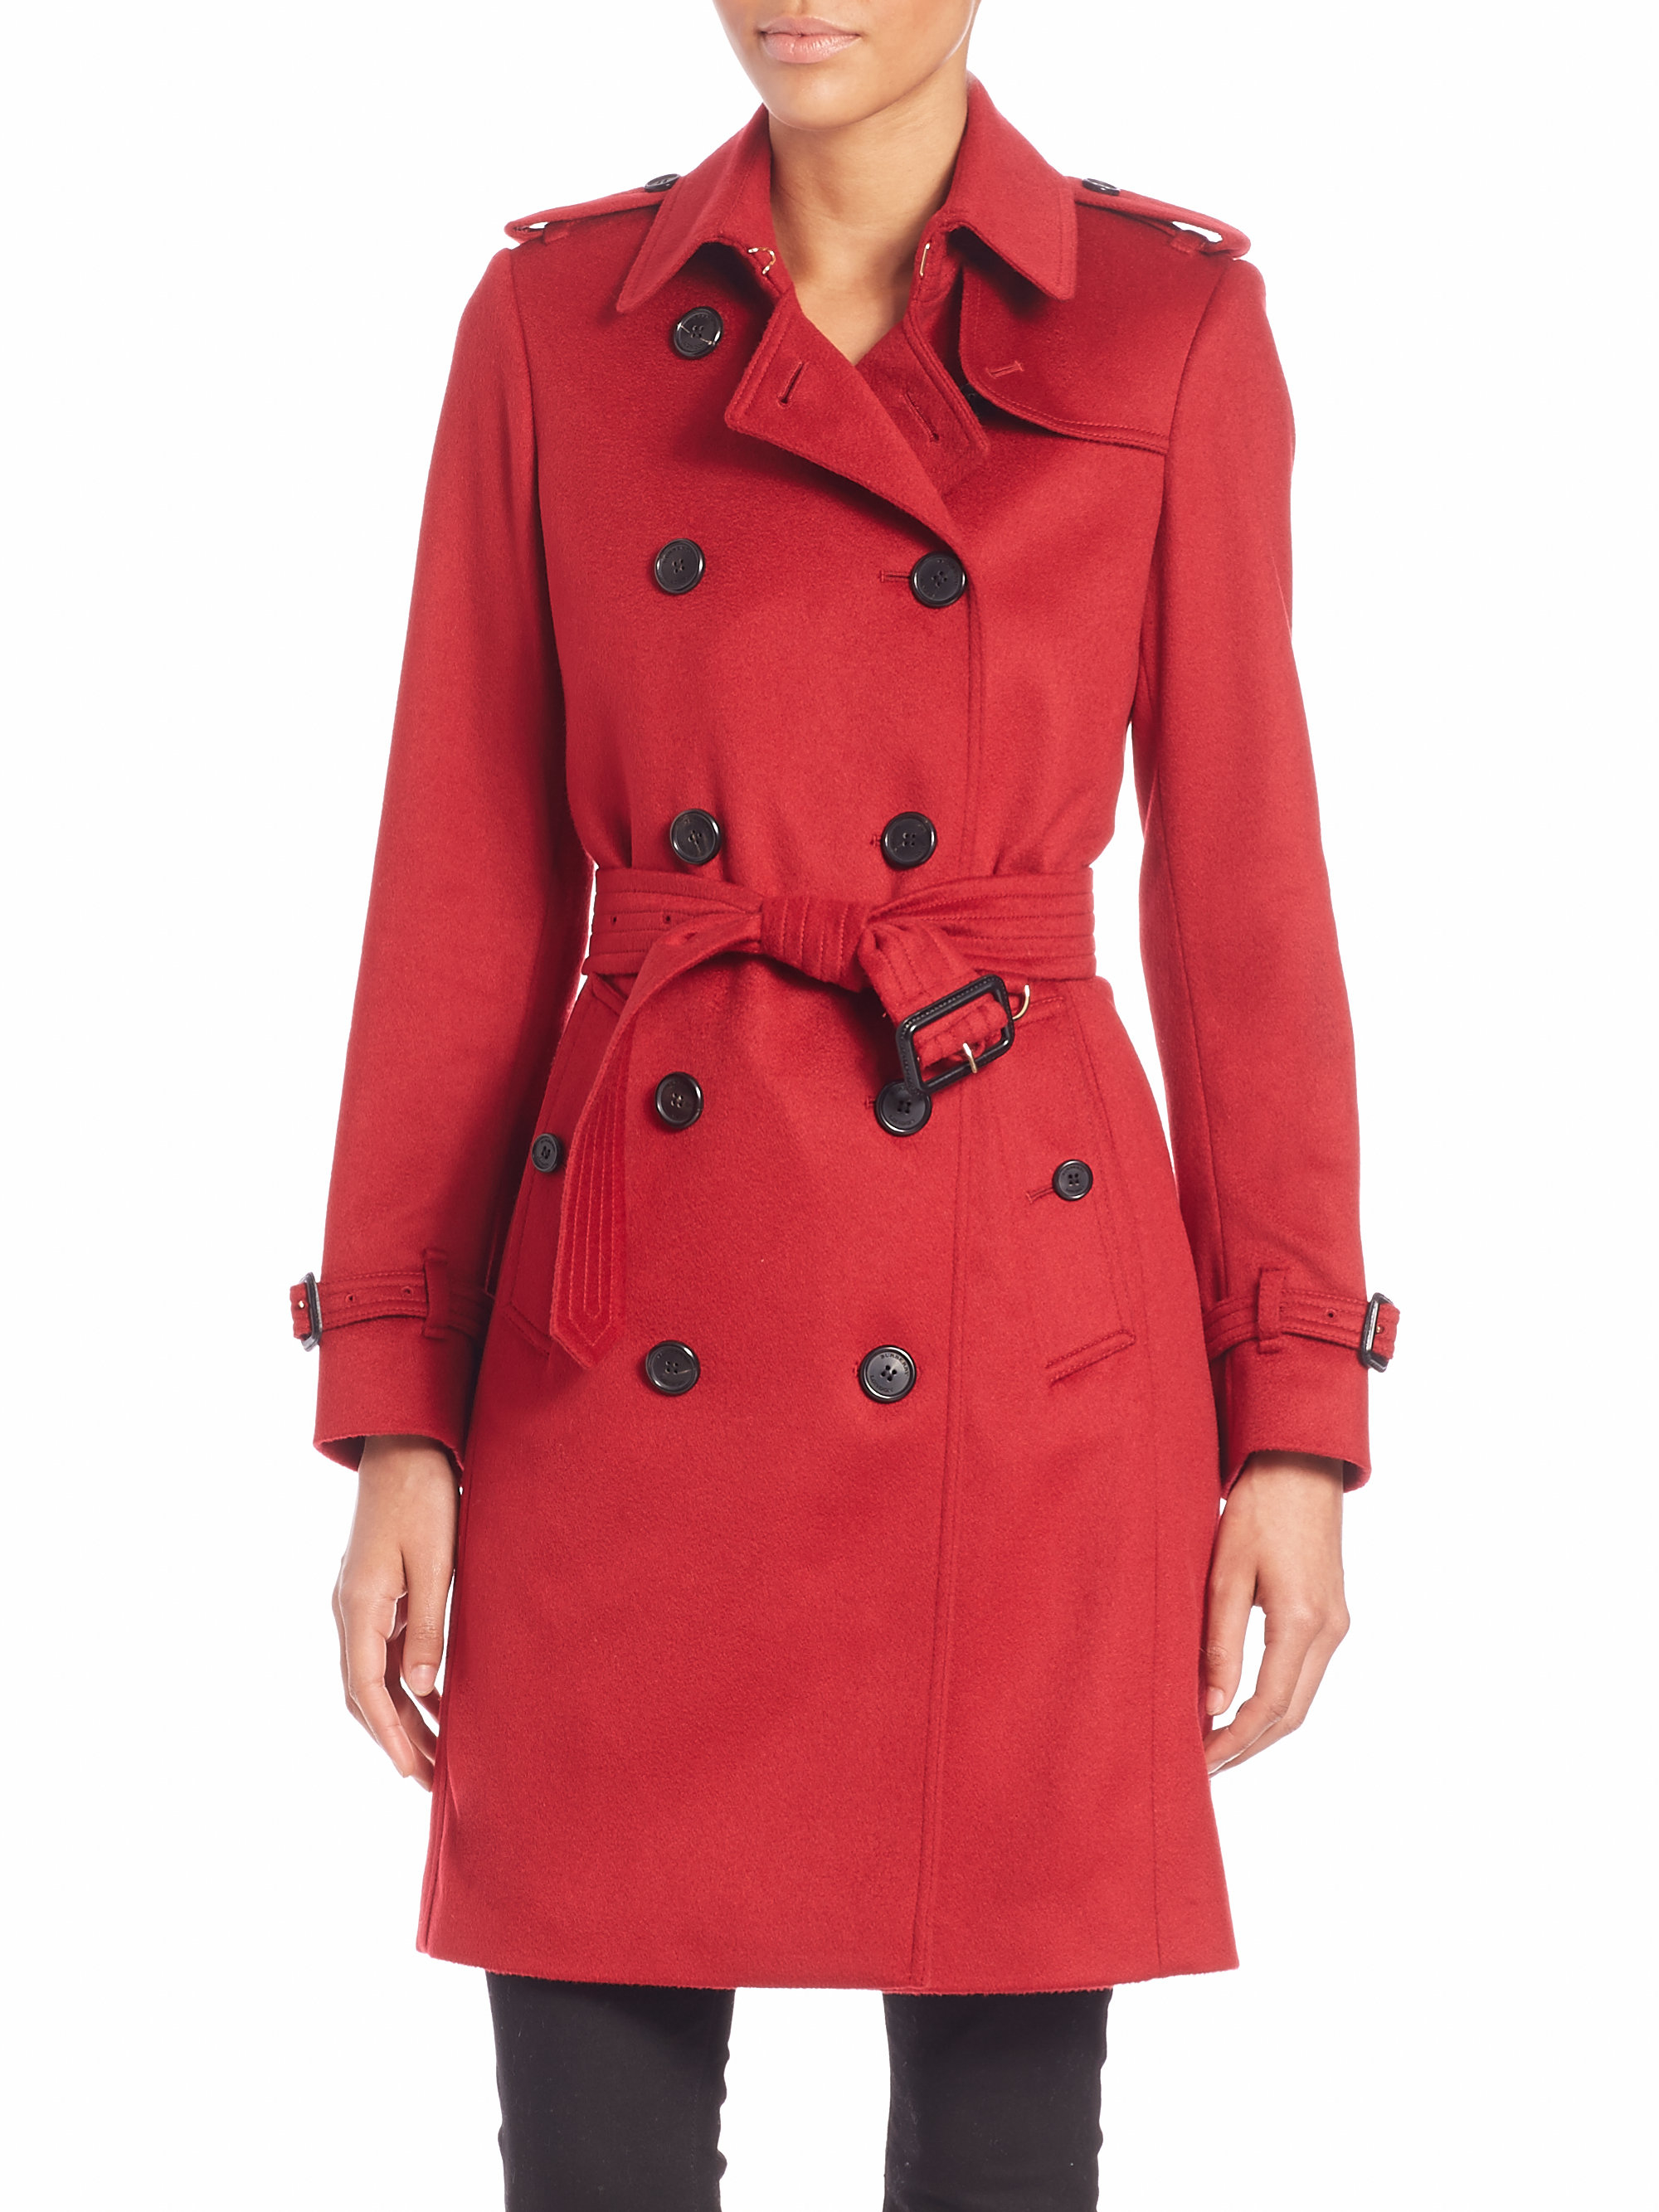 Burberry Kensington Parade Red Cashmere Trench Coat - Lyst